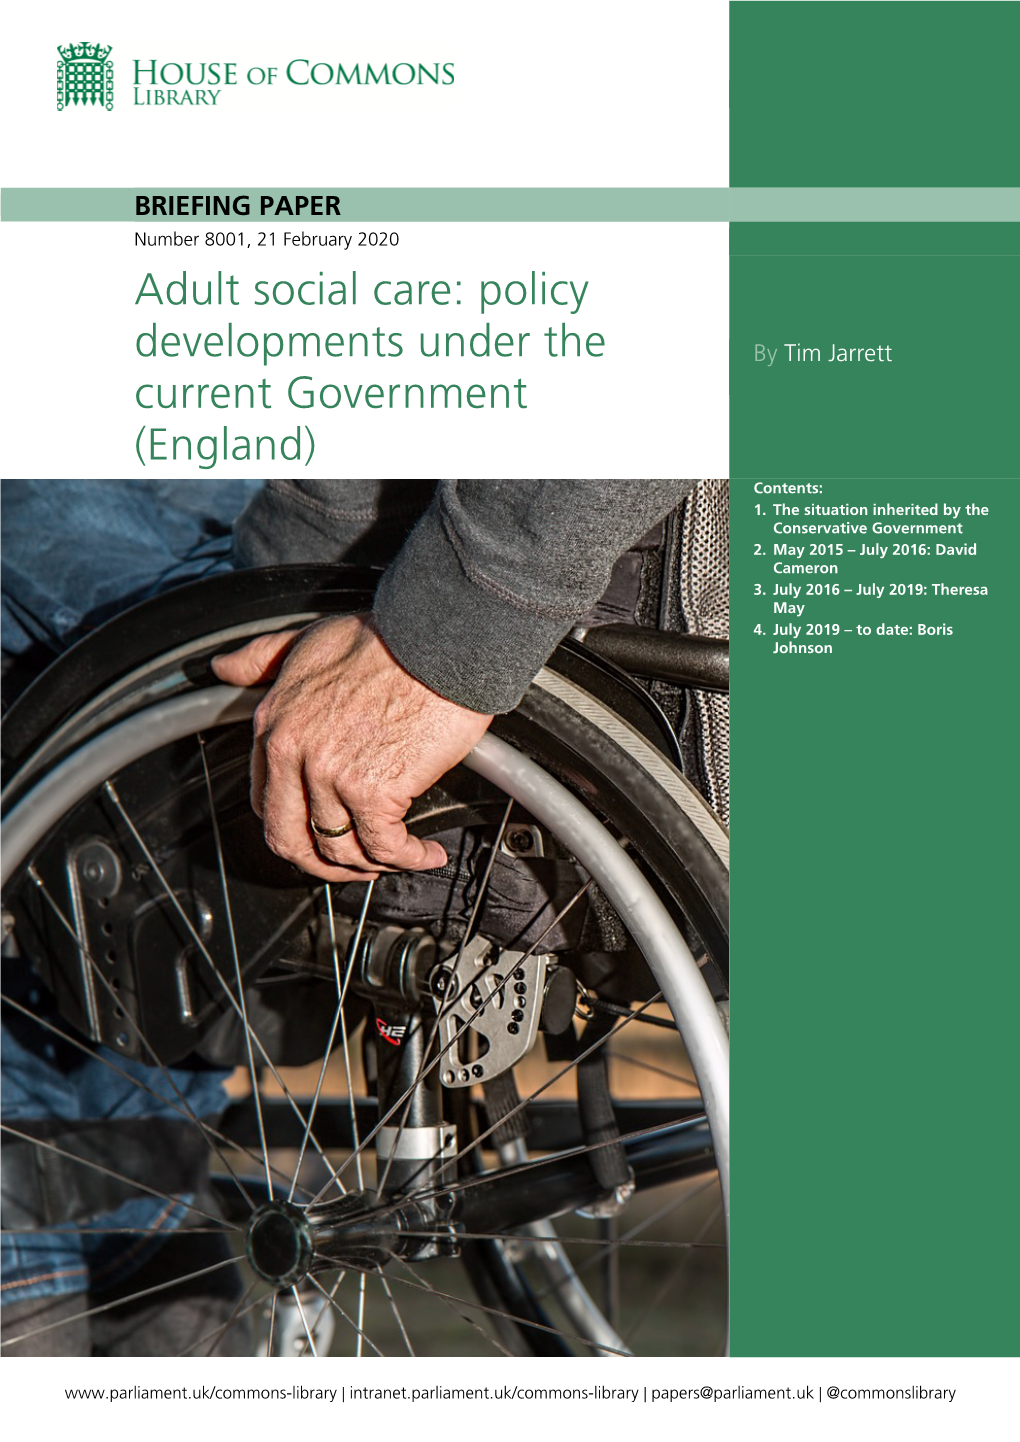 Adult Social Care: Policy Developments Under the Current Government (England)